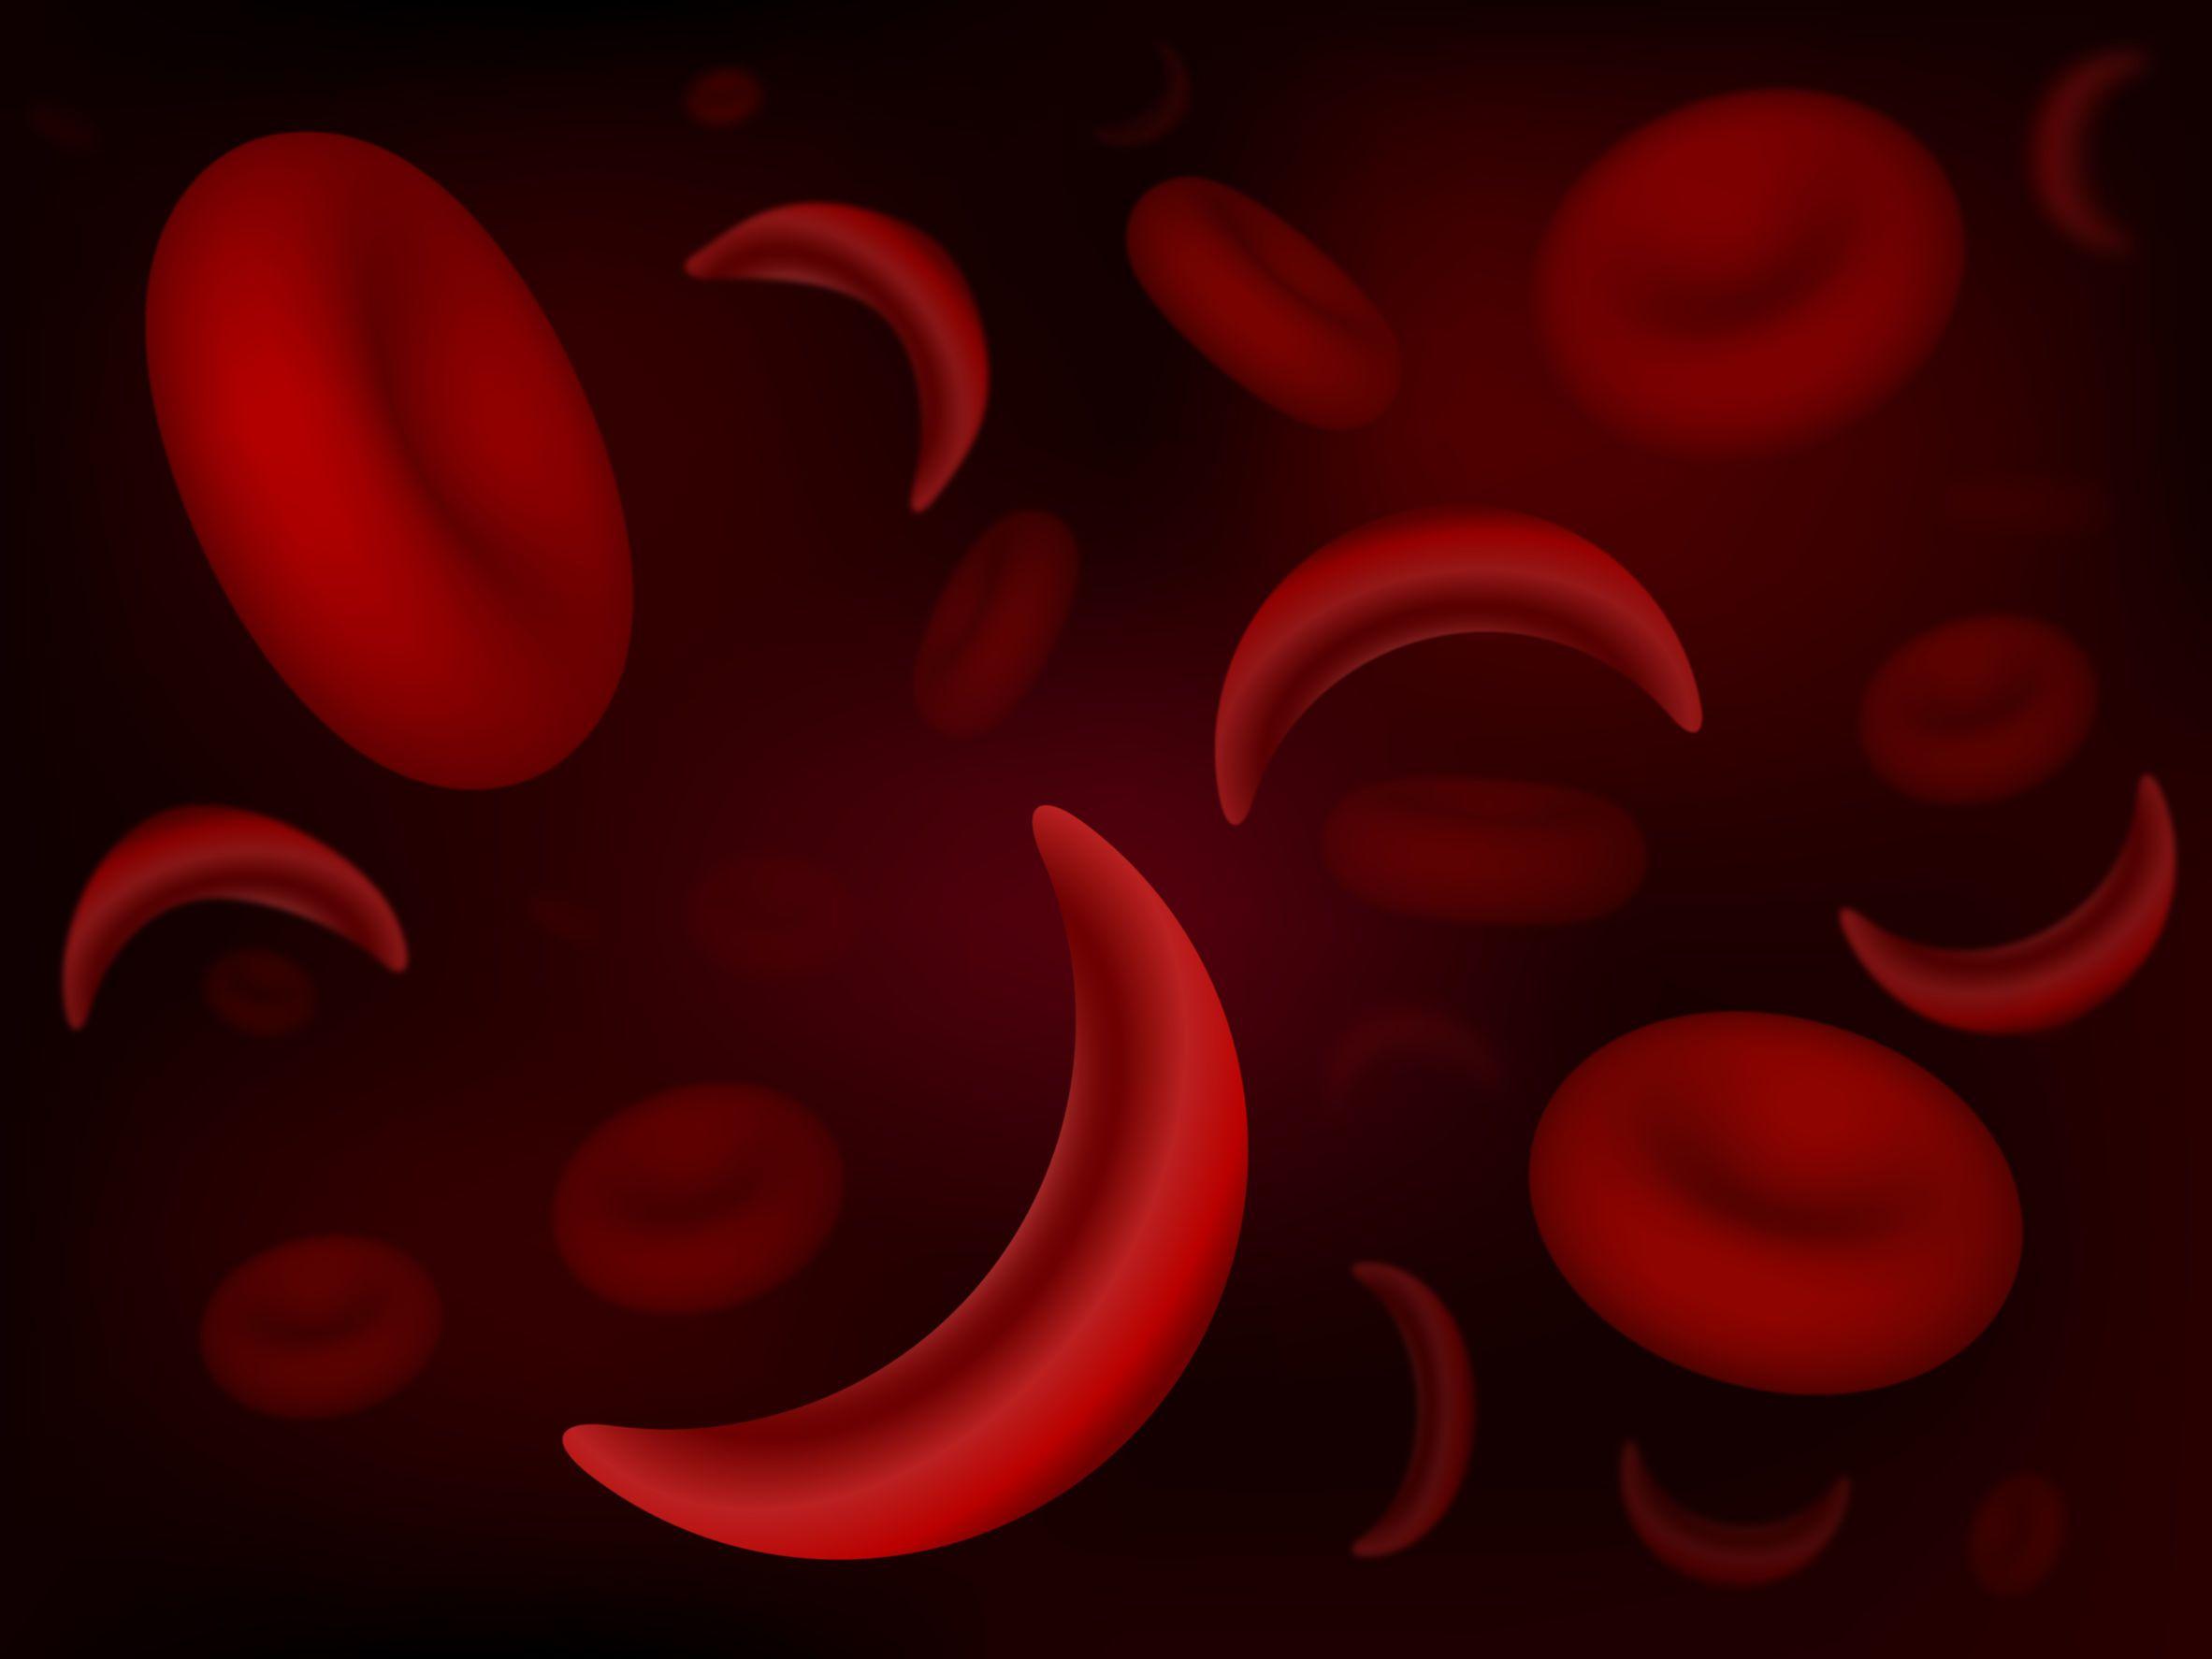 Sickle Cell Disease Overview